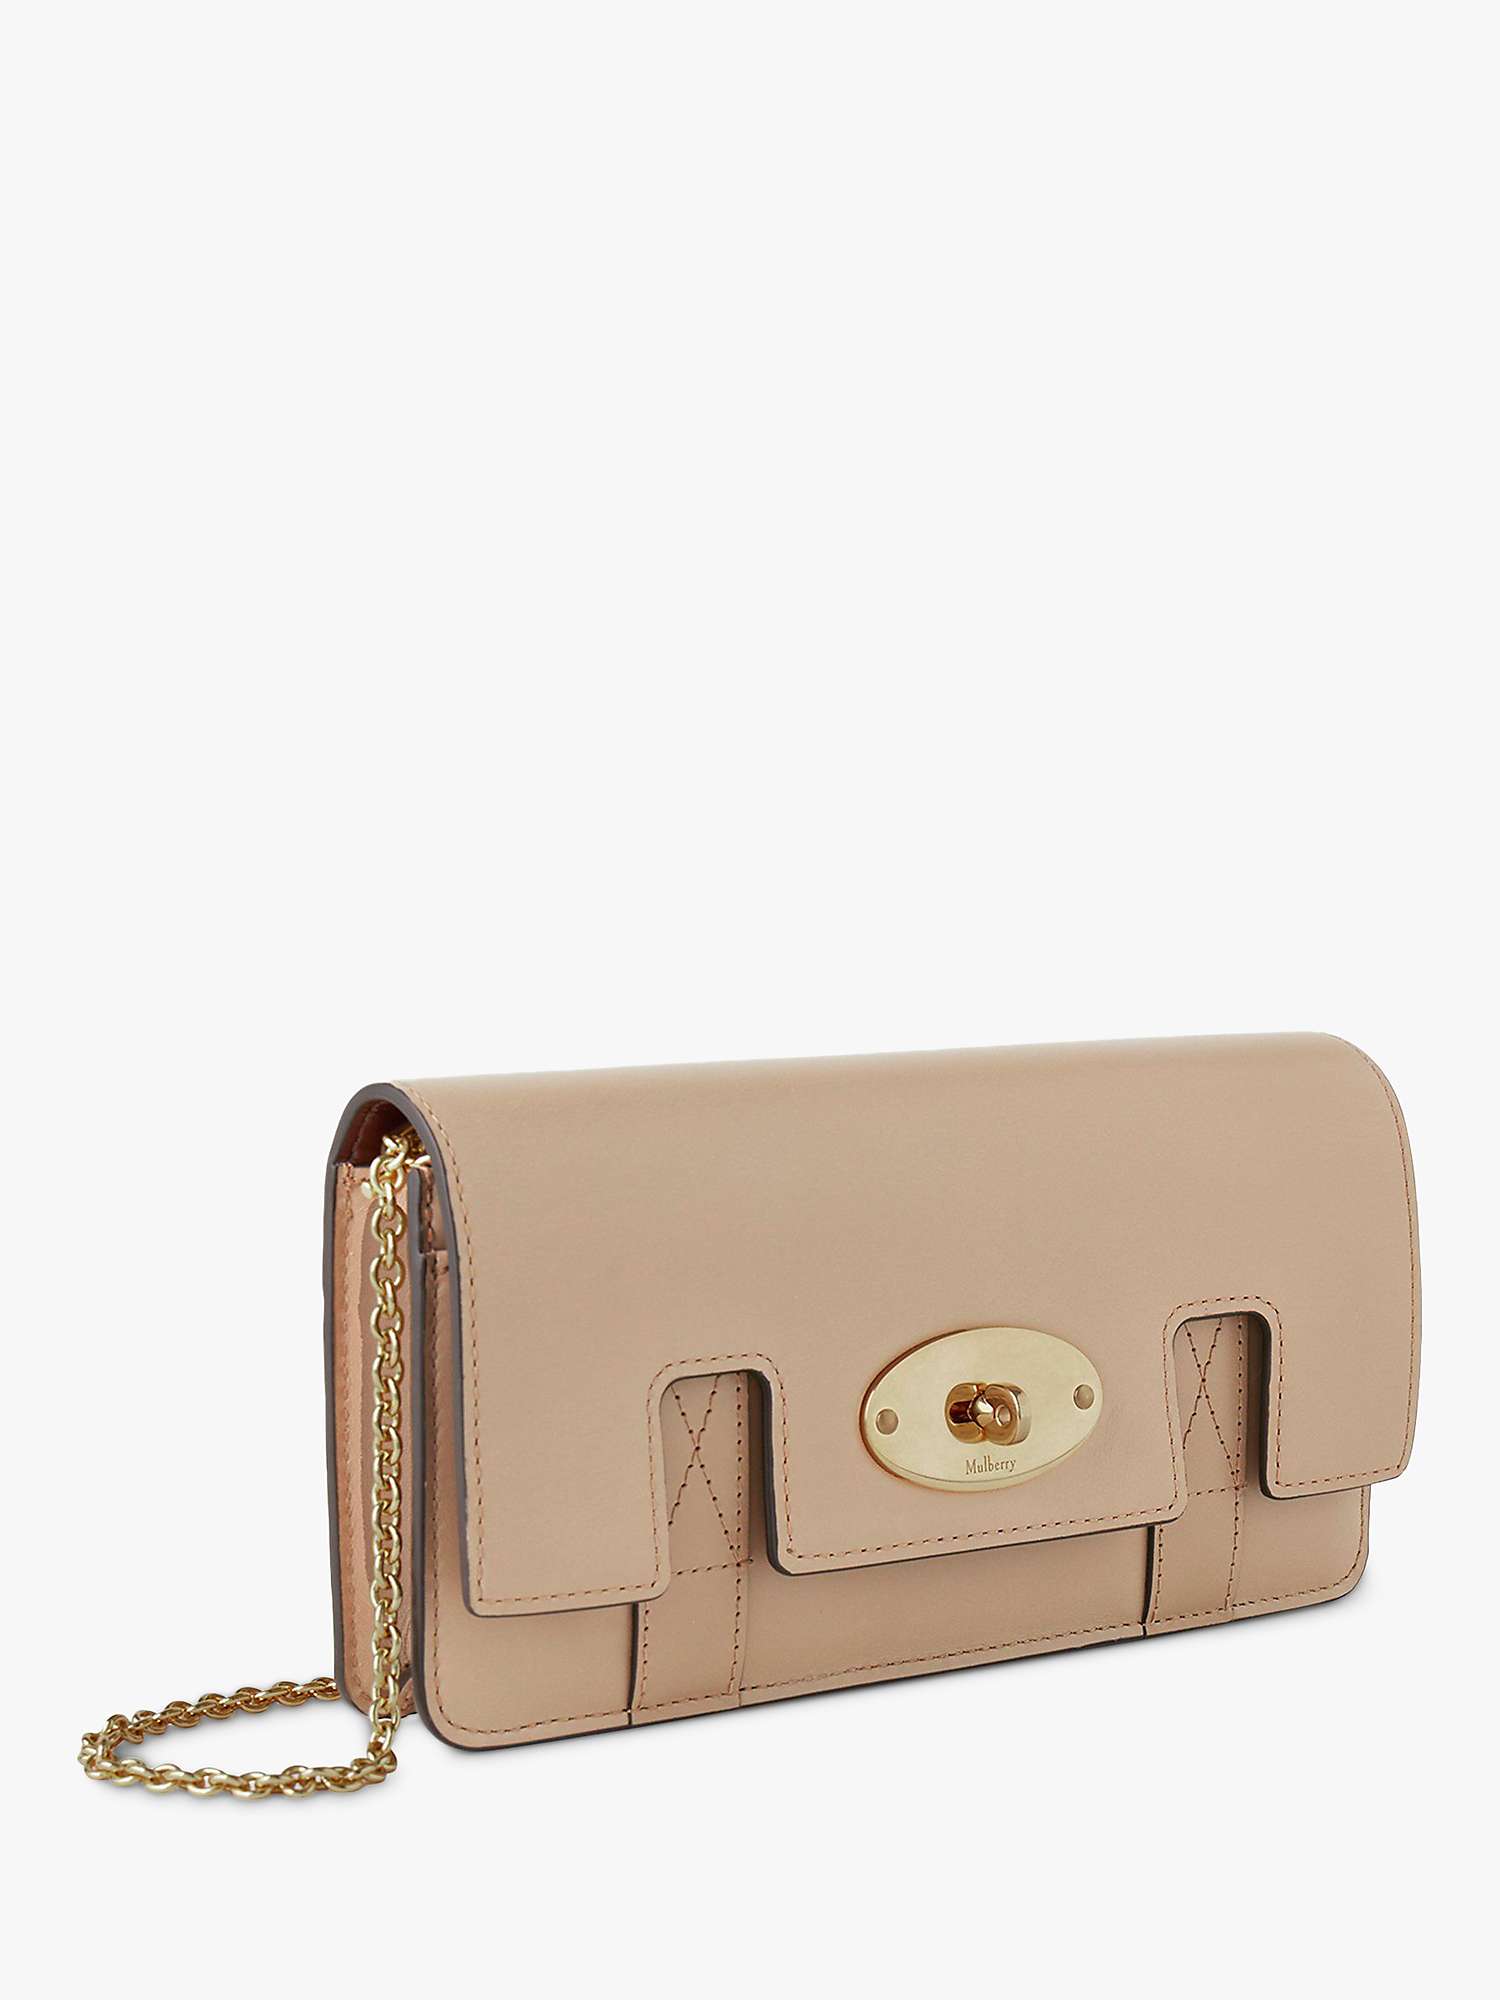 Buy Mulberry East West Bayswater Clutch Online at johnlewis.com